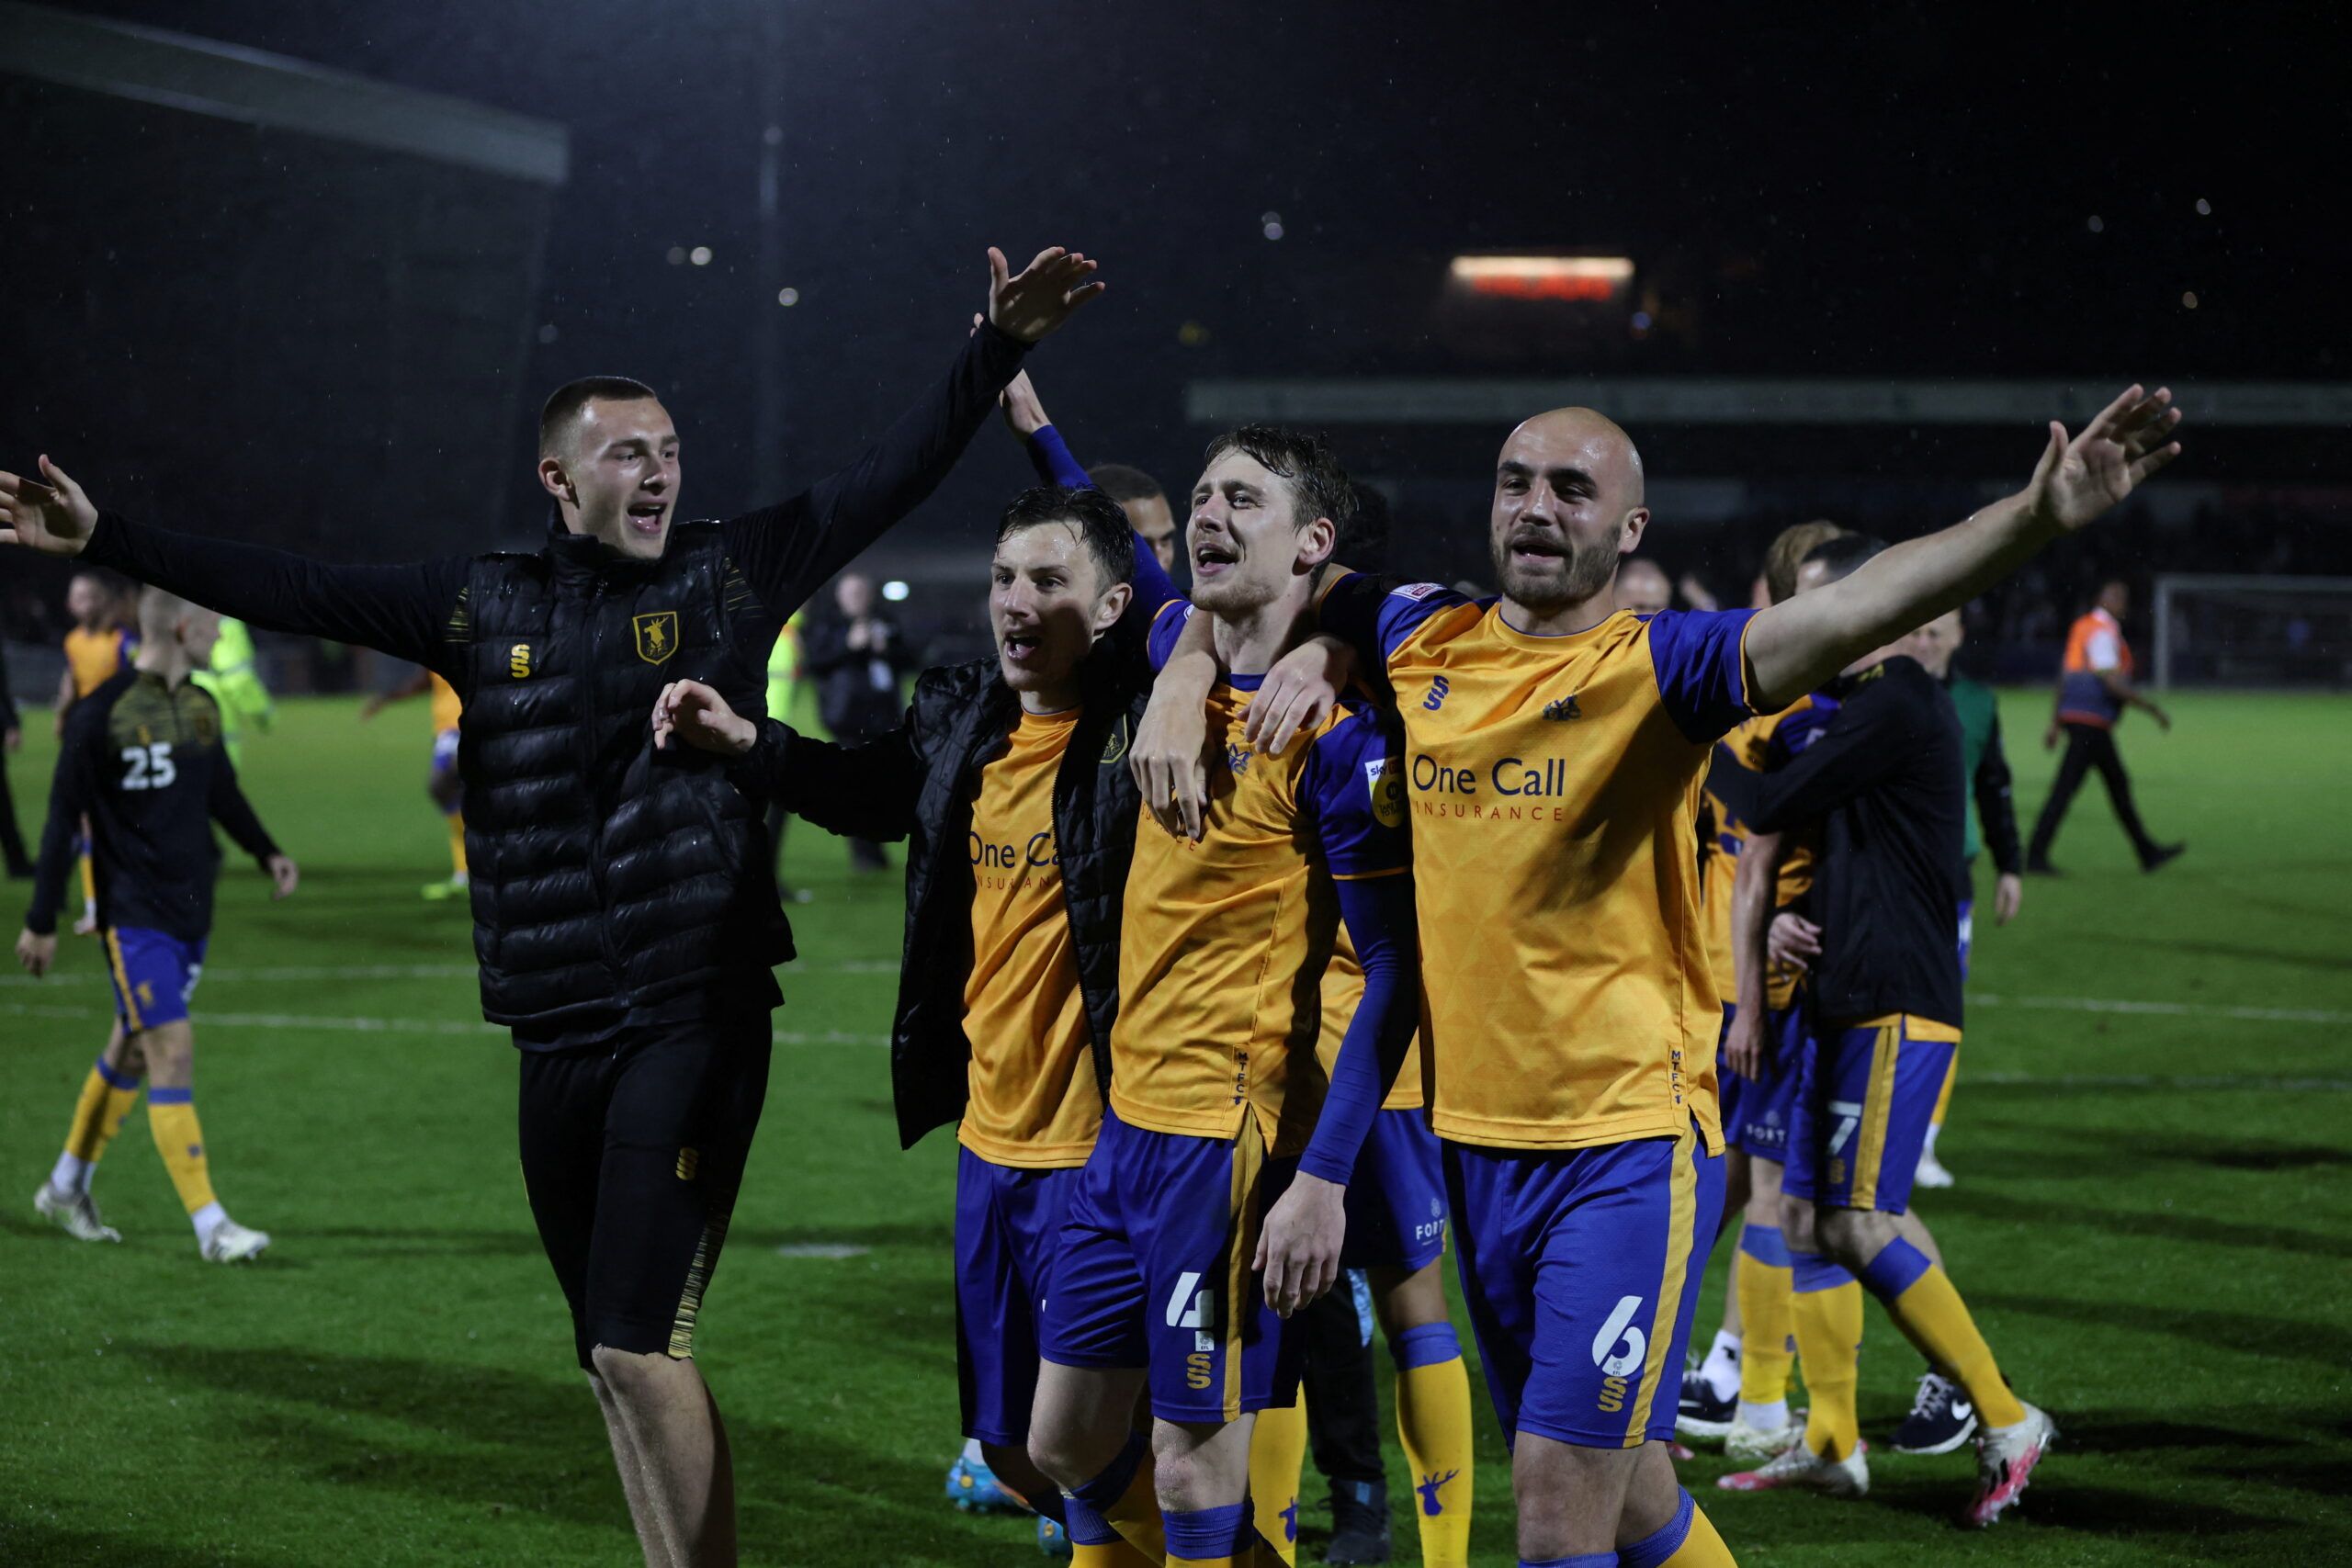 Soccer Football - League Two - Play-Off Semi Final Second Leg - Northampton Town v Mansfield Town - Sixfields Stadium, Northampton, Britain - May 18, 2022   Mansfield's Elliott Hewitt, Farrend Rawson and teammates celebrate after the match   Action Images/Paul Childs    EDITORIAL USE ONLY. No use with unauthorized audio, video, data, fixture lists, club/league logos or 